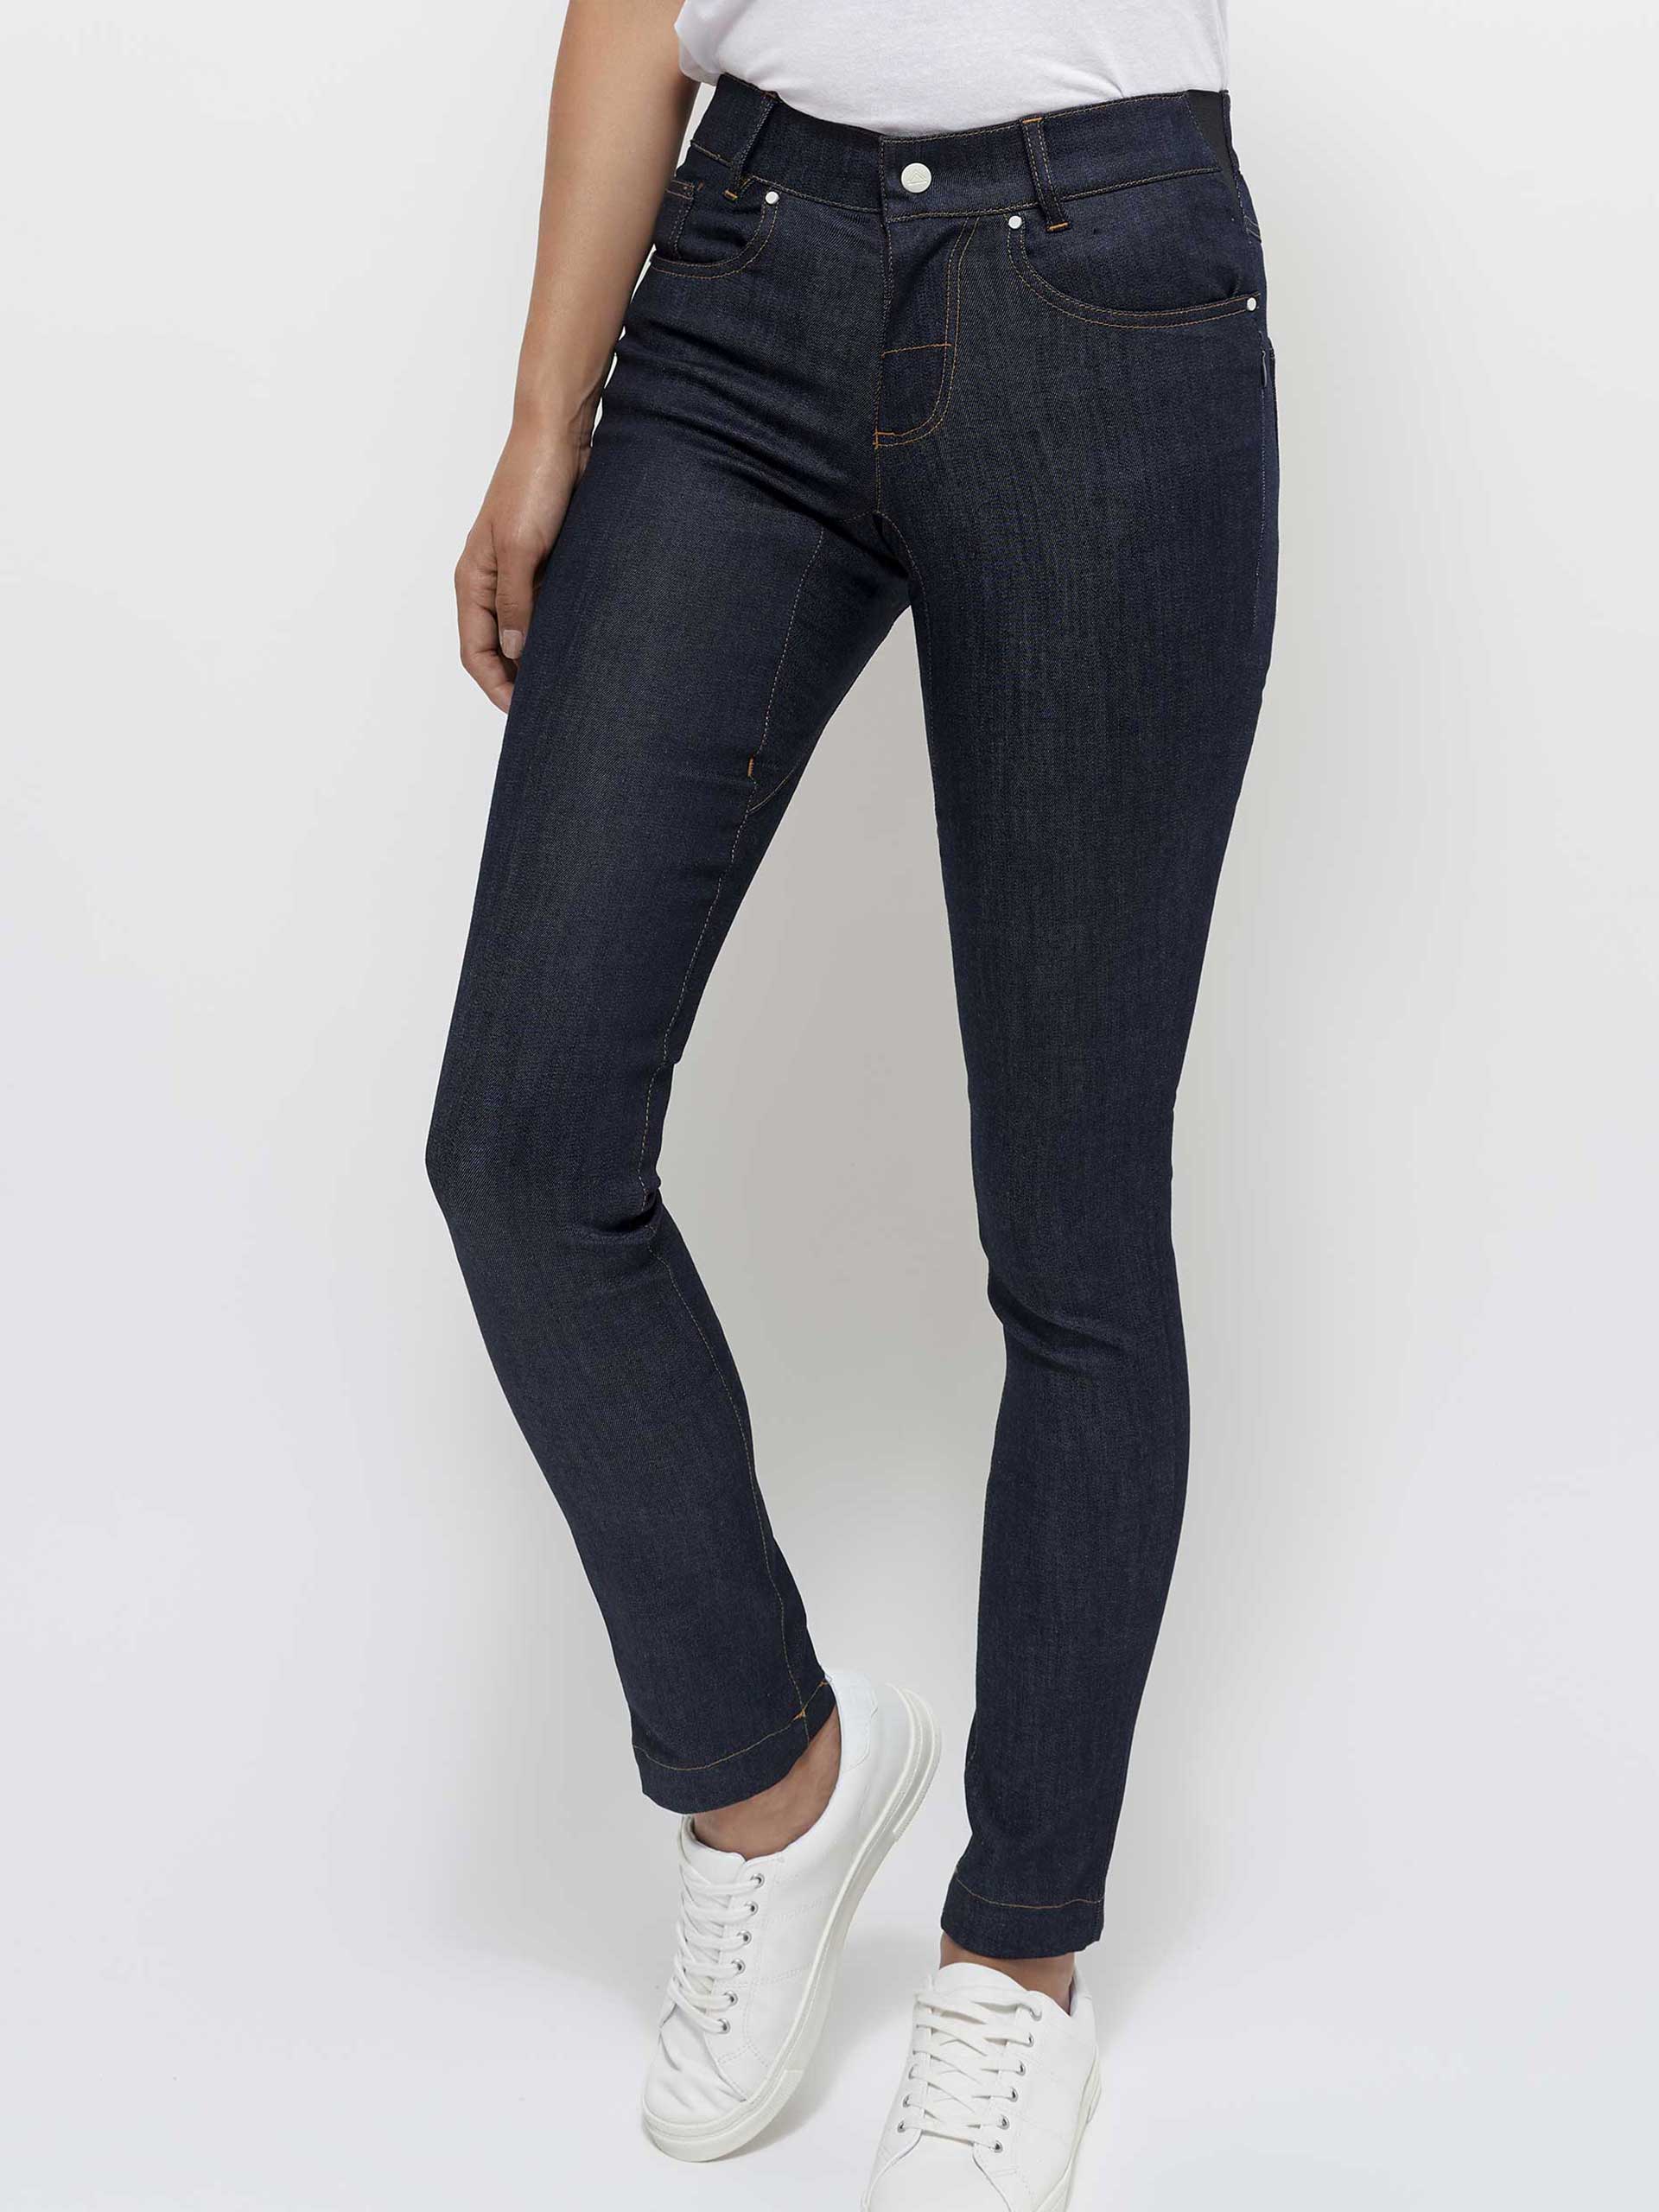 Looking For Wild Pantalon Denim - Jeans - Mujer